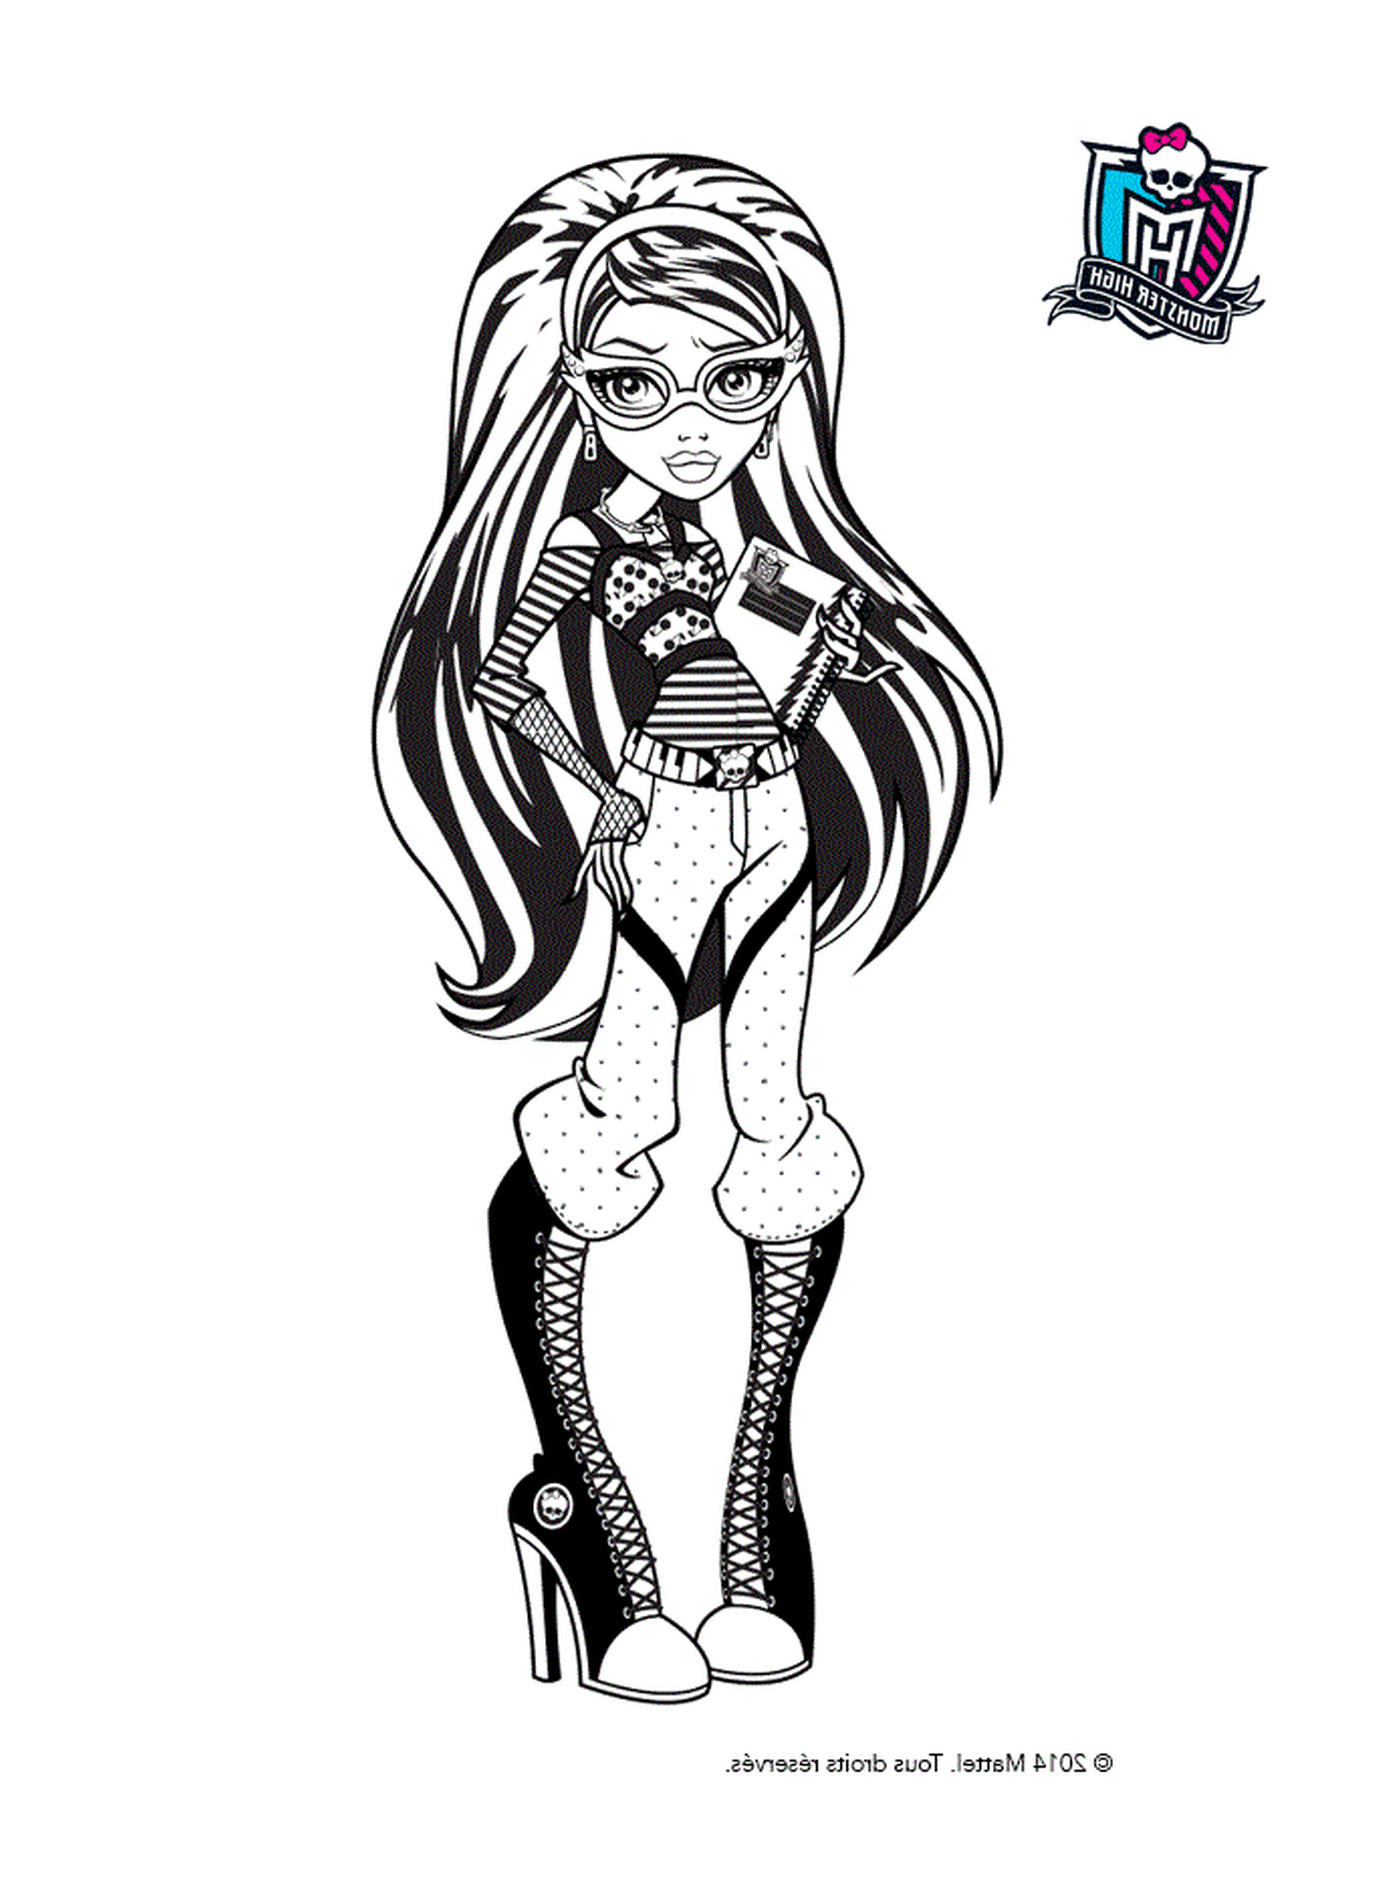 coloriage monster high ghoulia yelps prend la pose